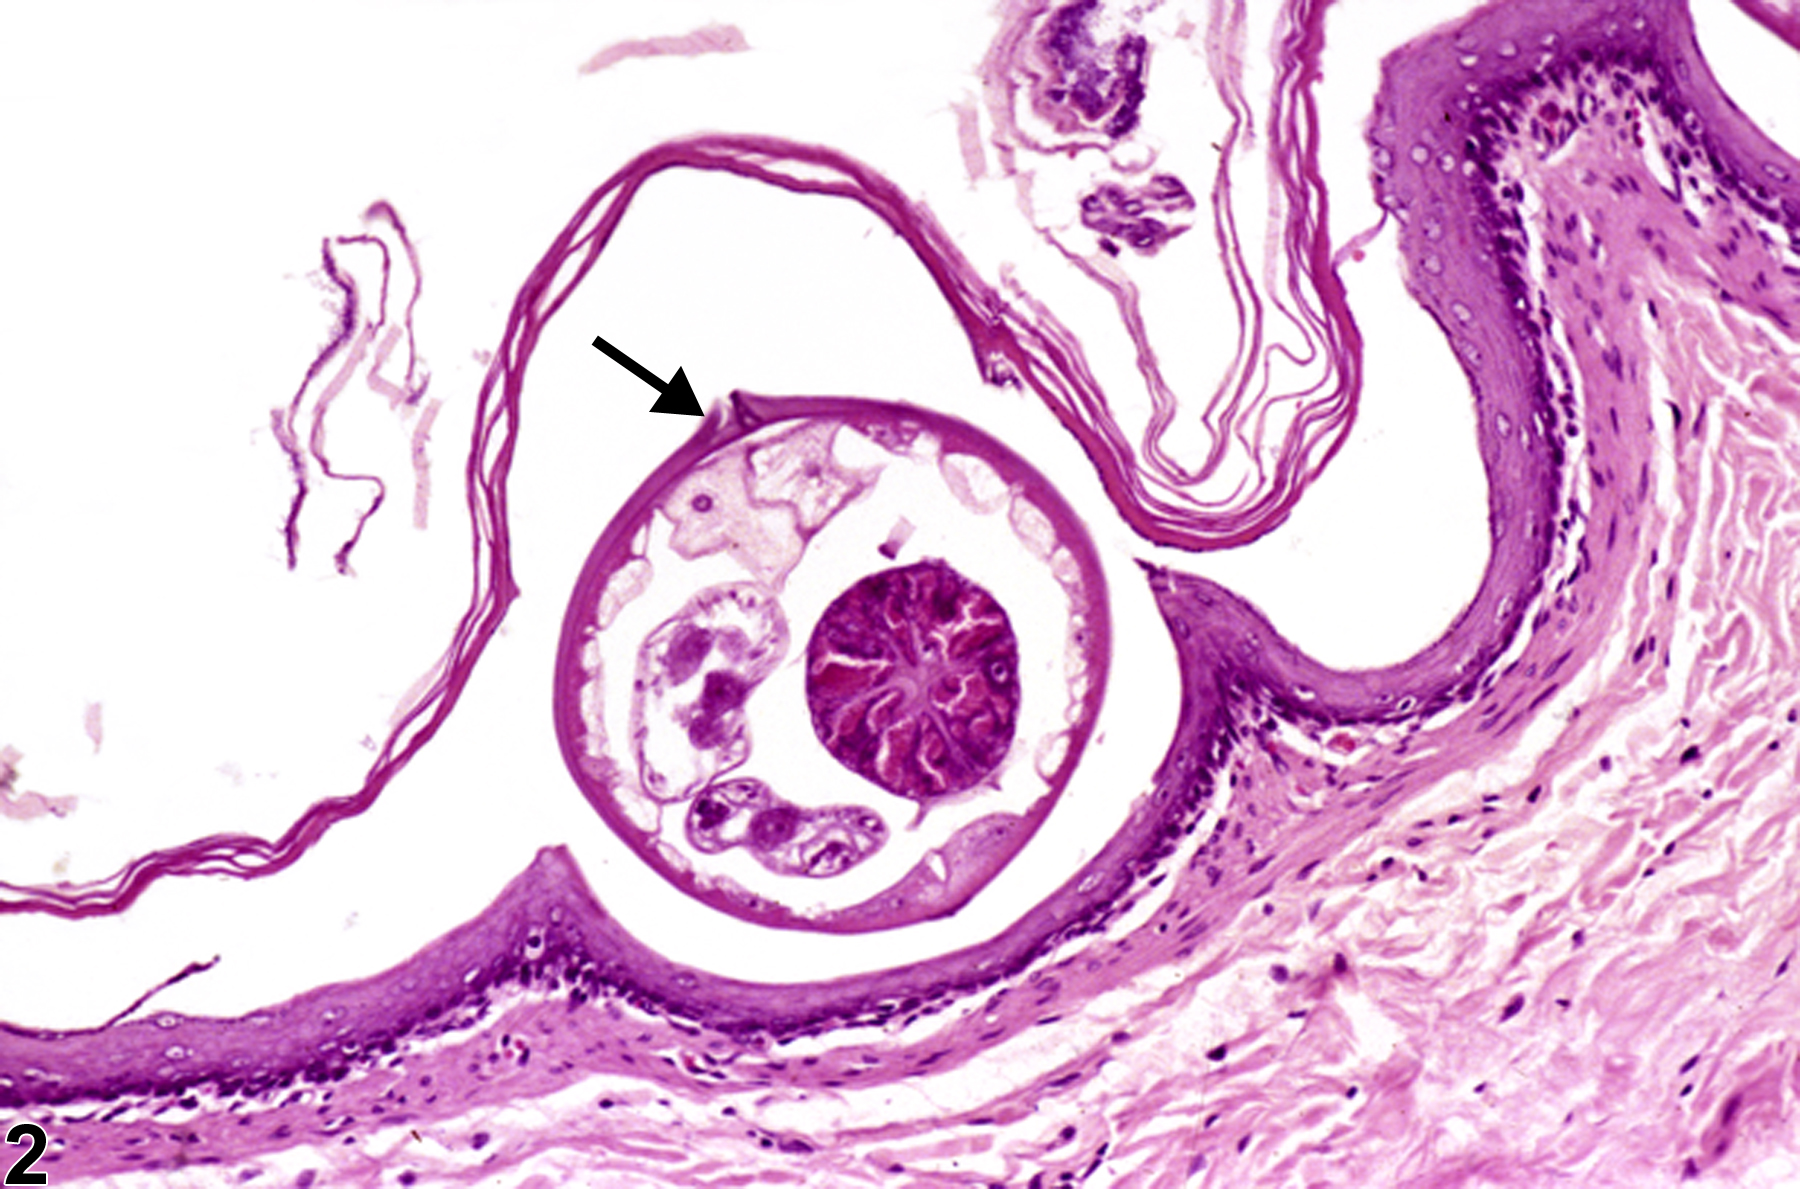 Image of parasite, metazoan in the forestomach from a male F344/N rat in a chronic study